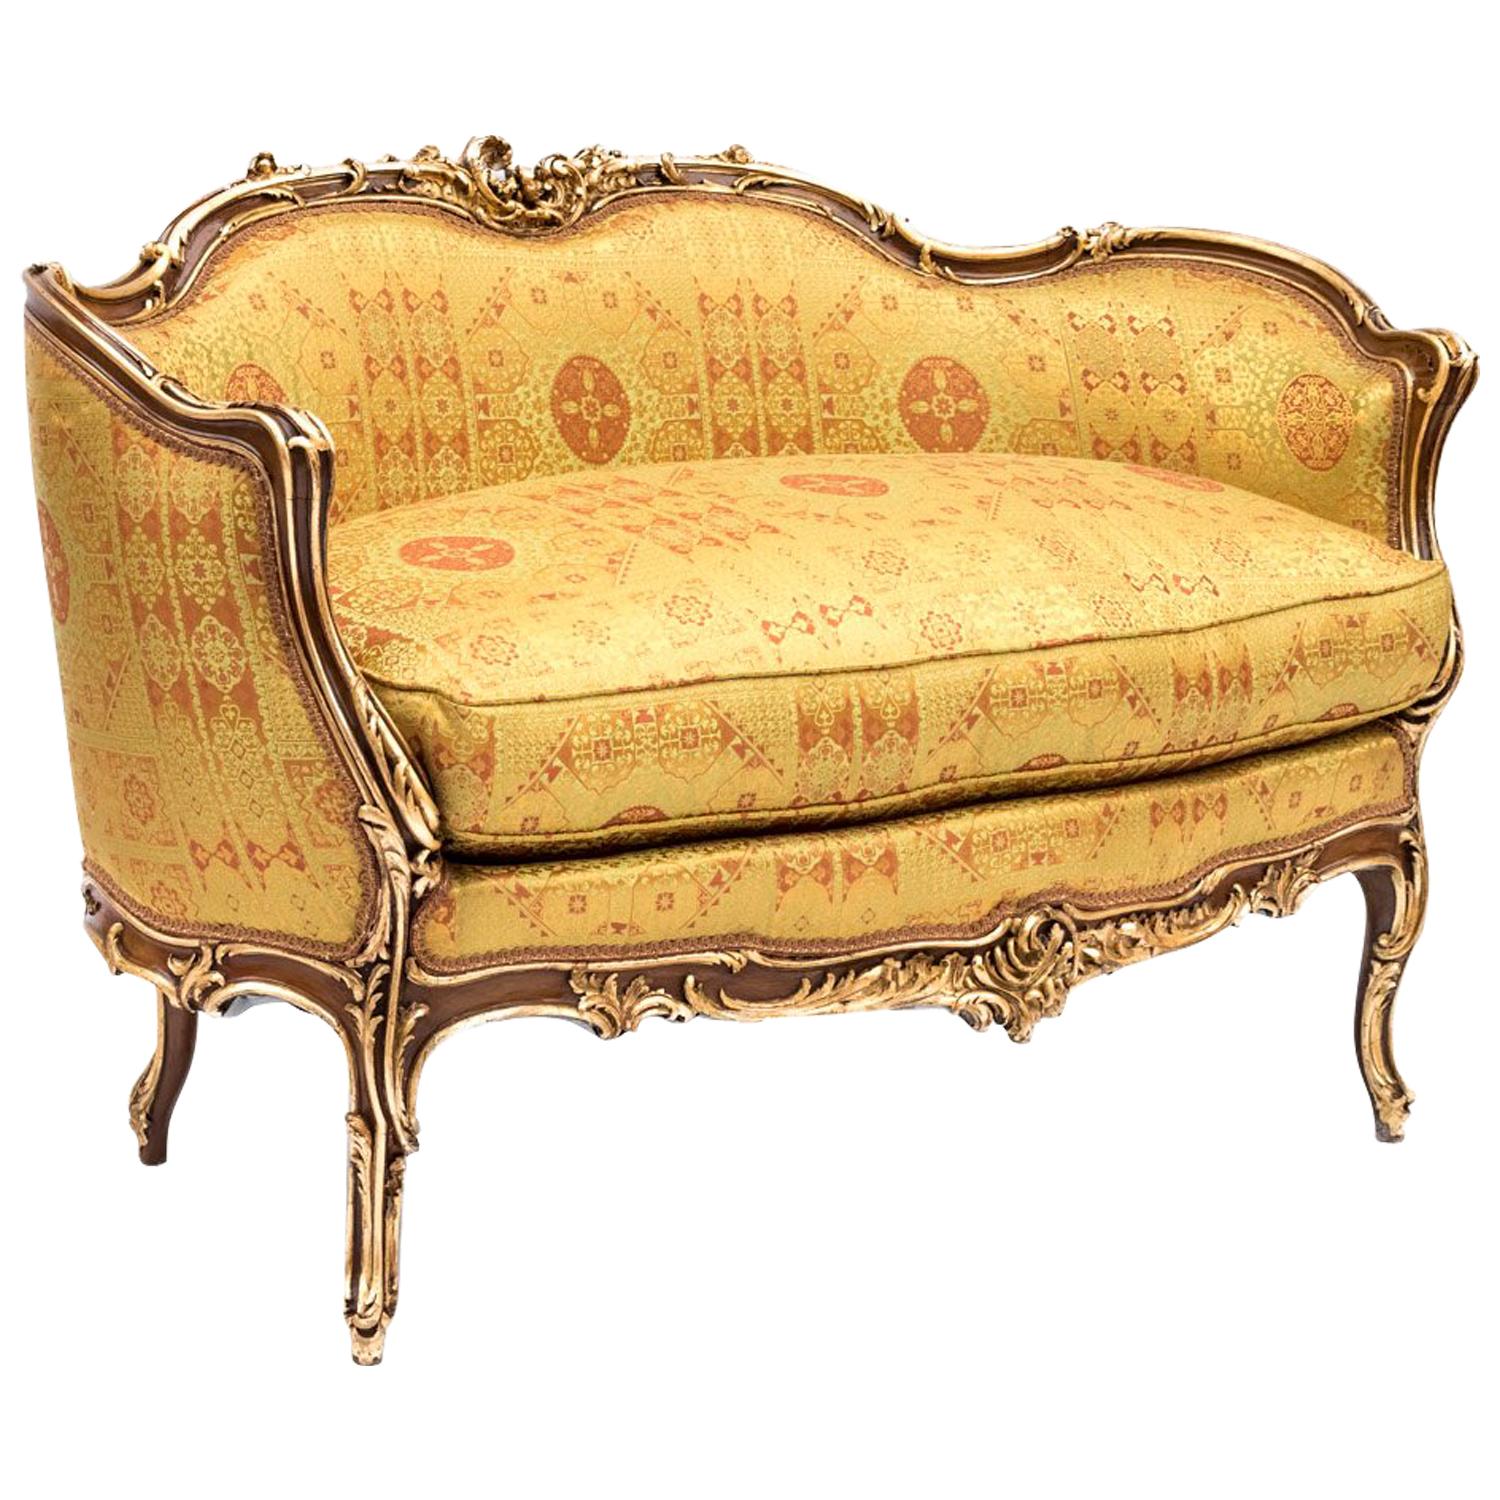 Small Rocaille Style Sofa, Natural Walnut and Gilt Highlights, Late 19th Century